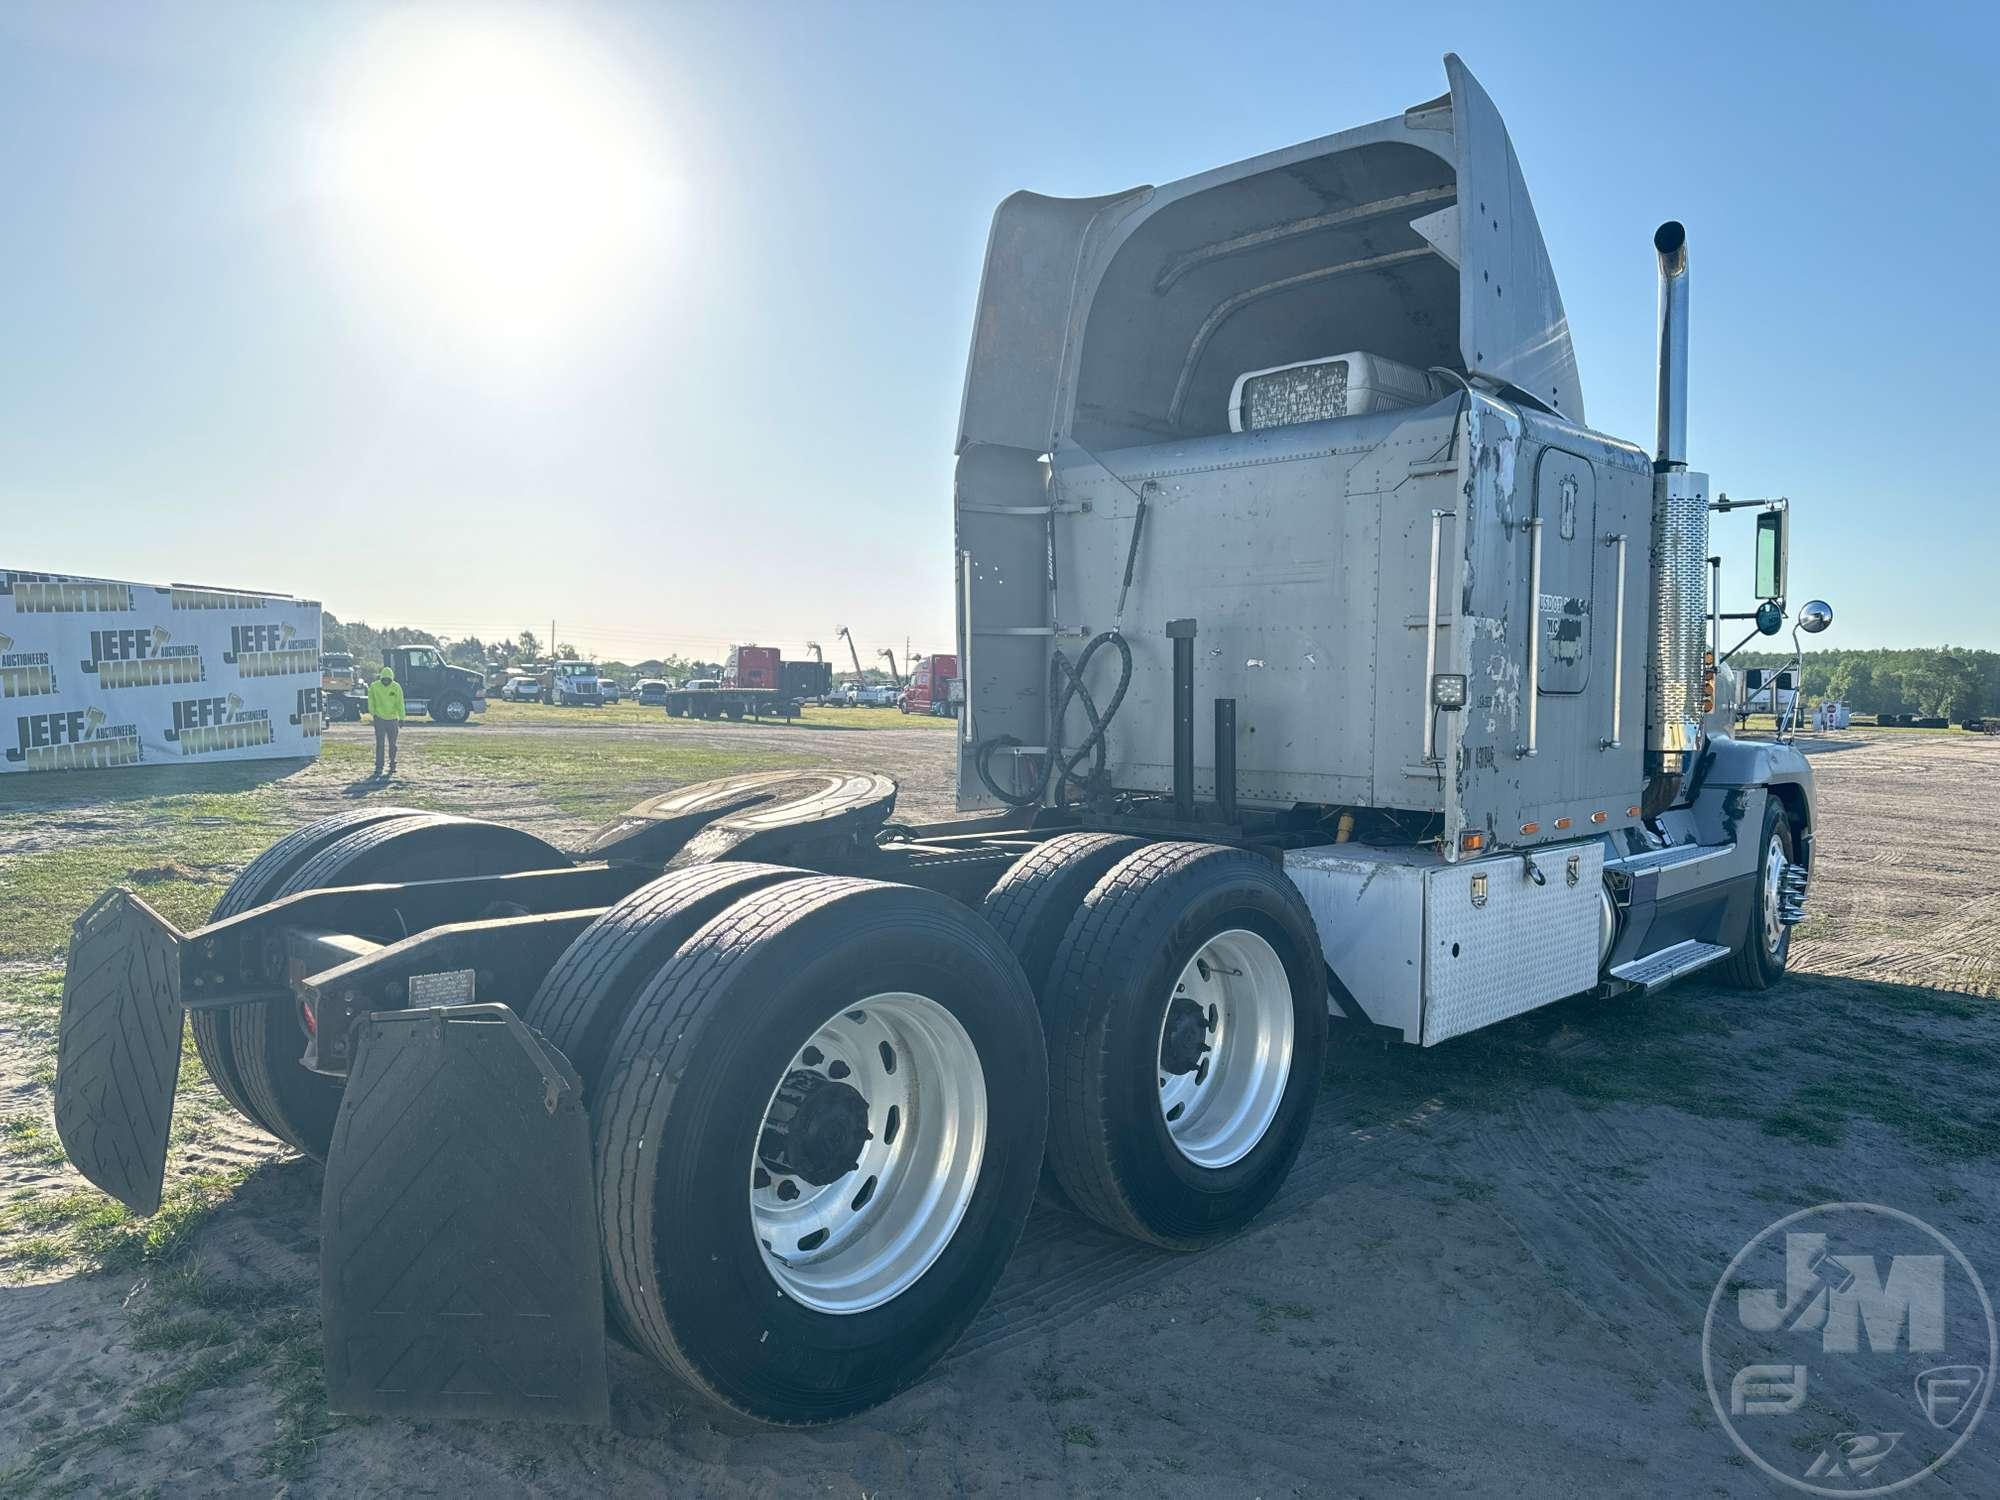 1993 FREIGHTLINER USF-1E TANDEM AXLE TRUCK TRACTOR VIN: 1FUYDSEB4PH431846